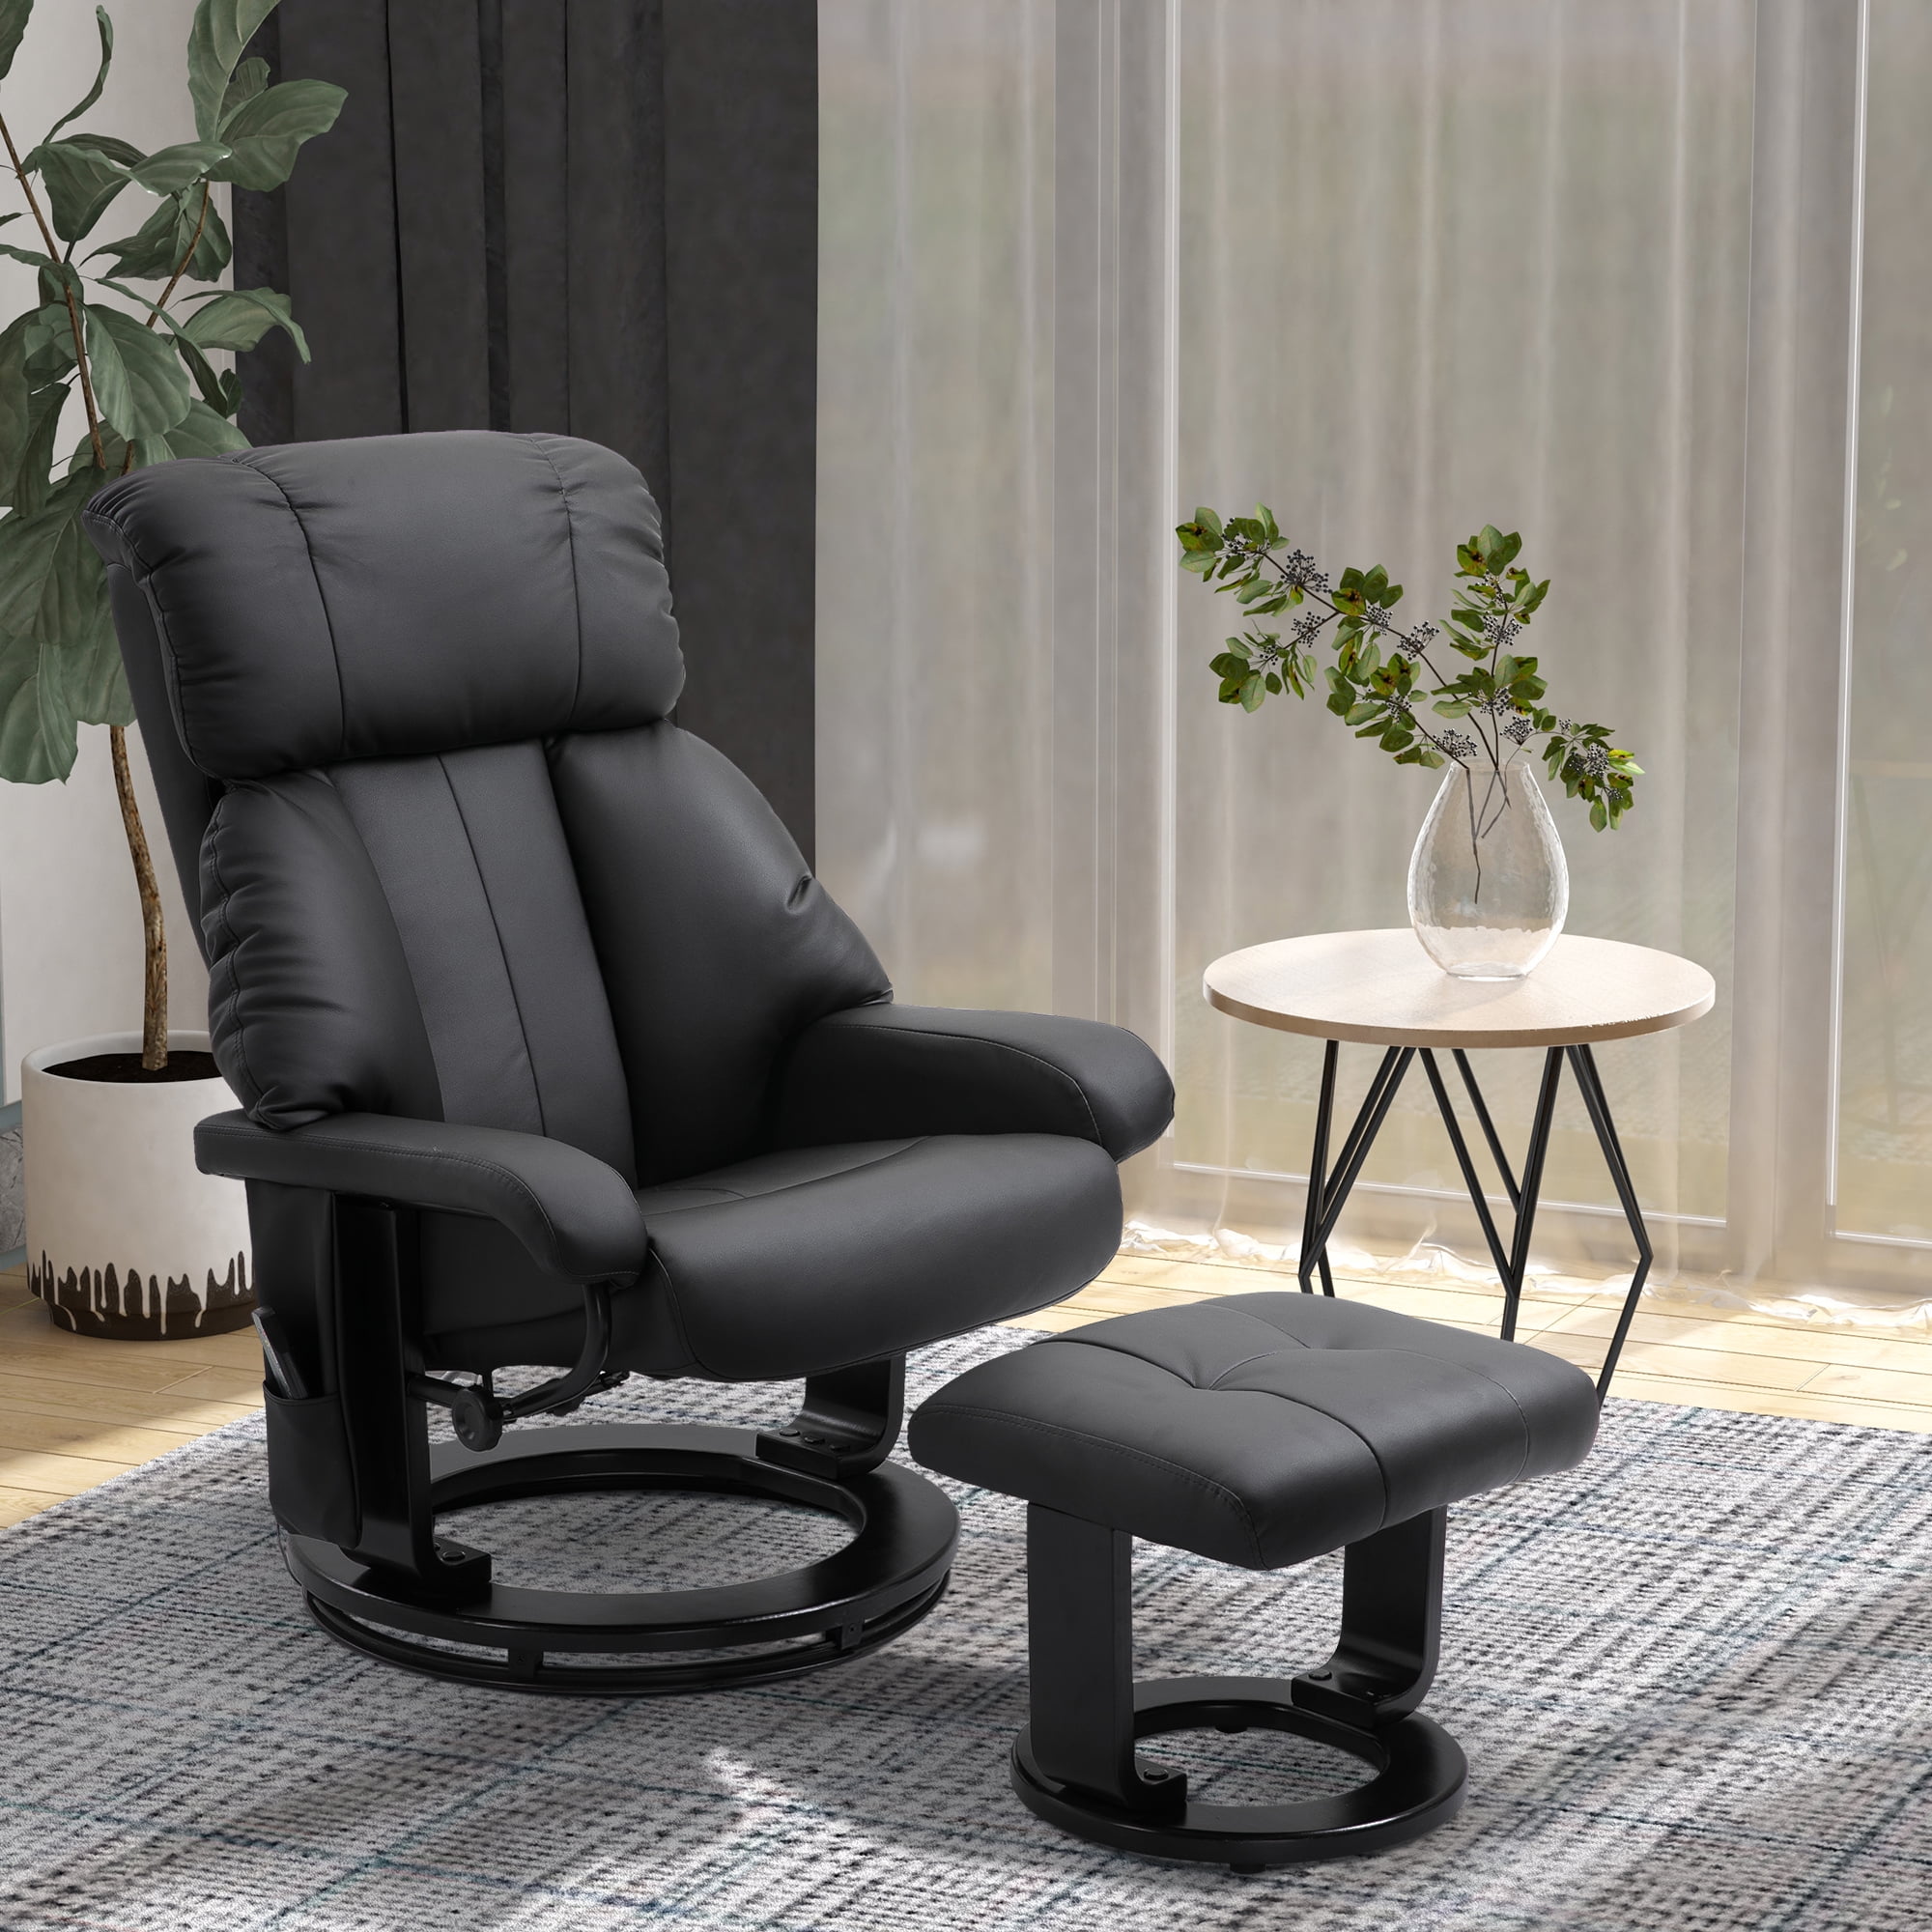 HOMCOM Brown Massage Recliner and Ottoman, PU Leisure Office Chair with 10  Vibration Points, Adjustable Backrest 700-116V71BN - The Home Depot